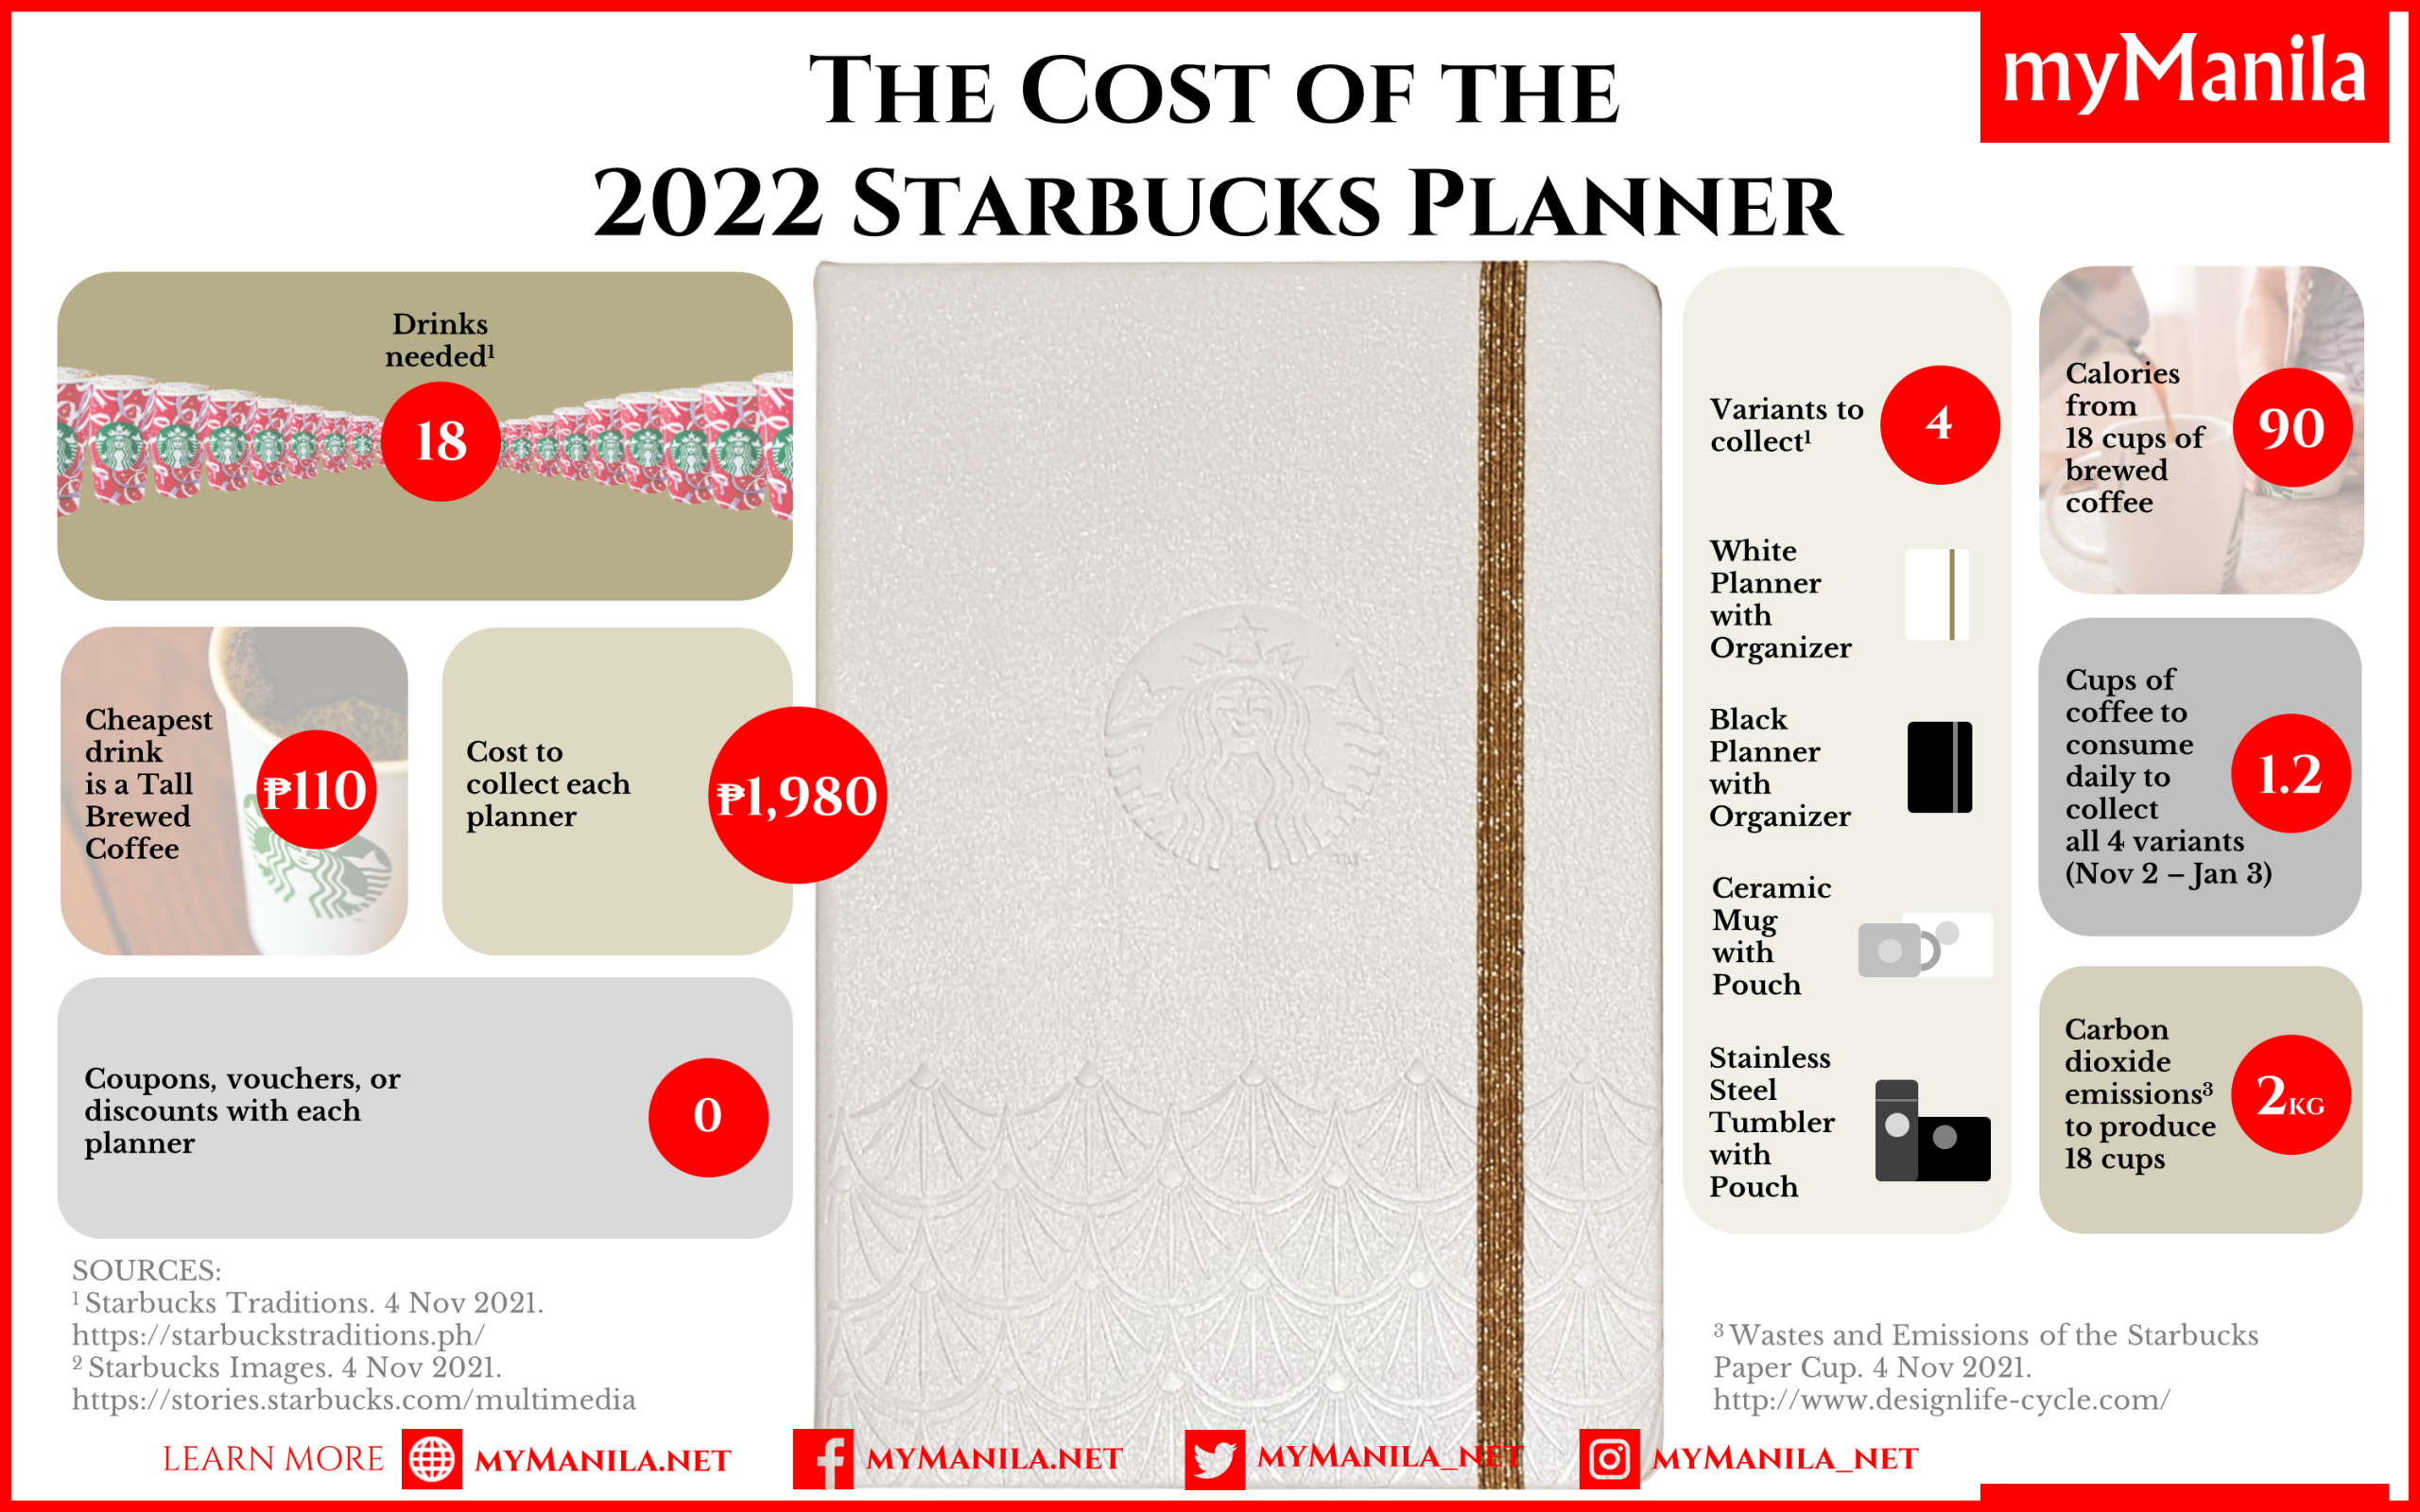 The Cost of the 2022 Starbucks Planner